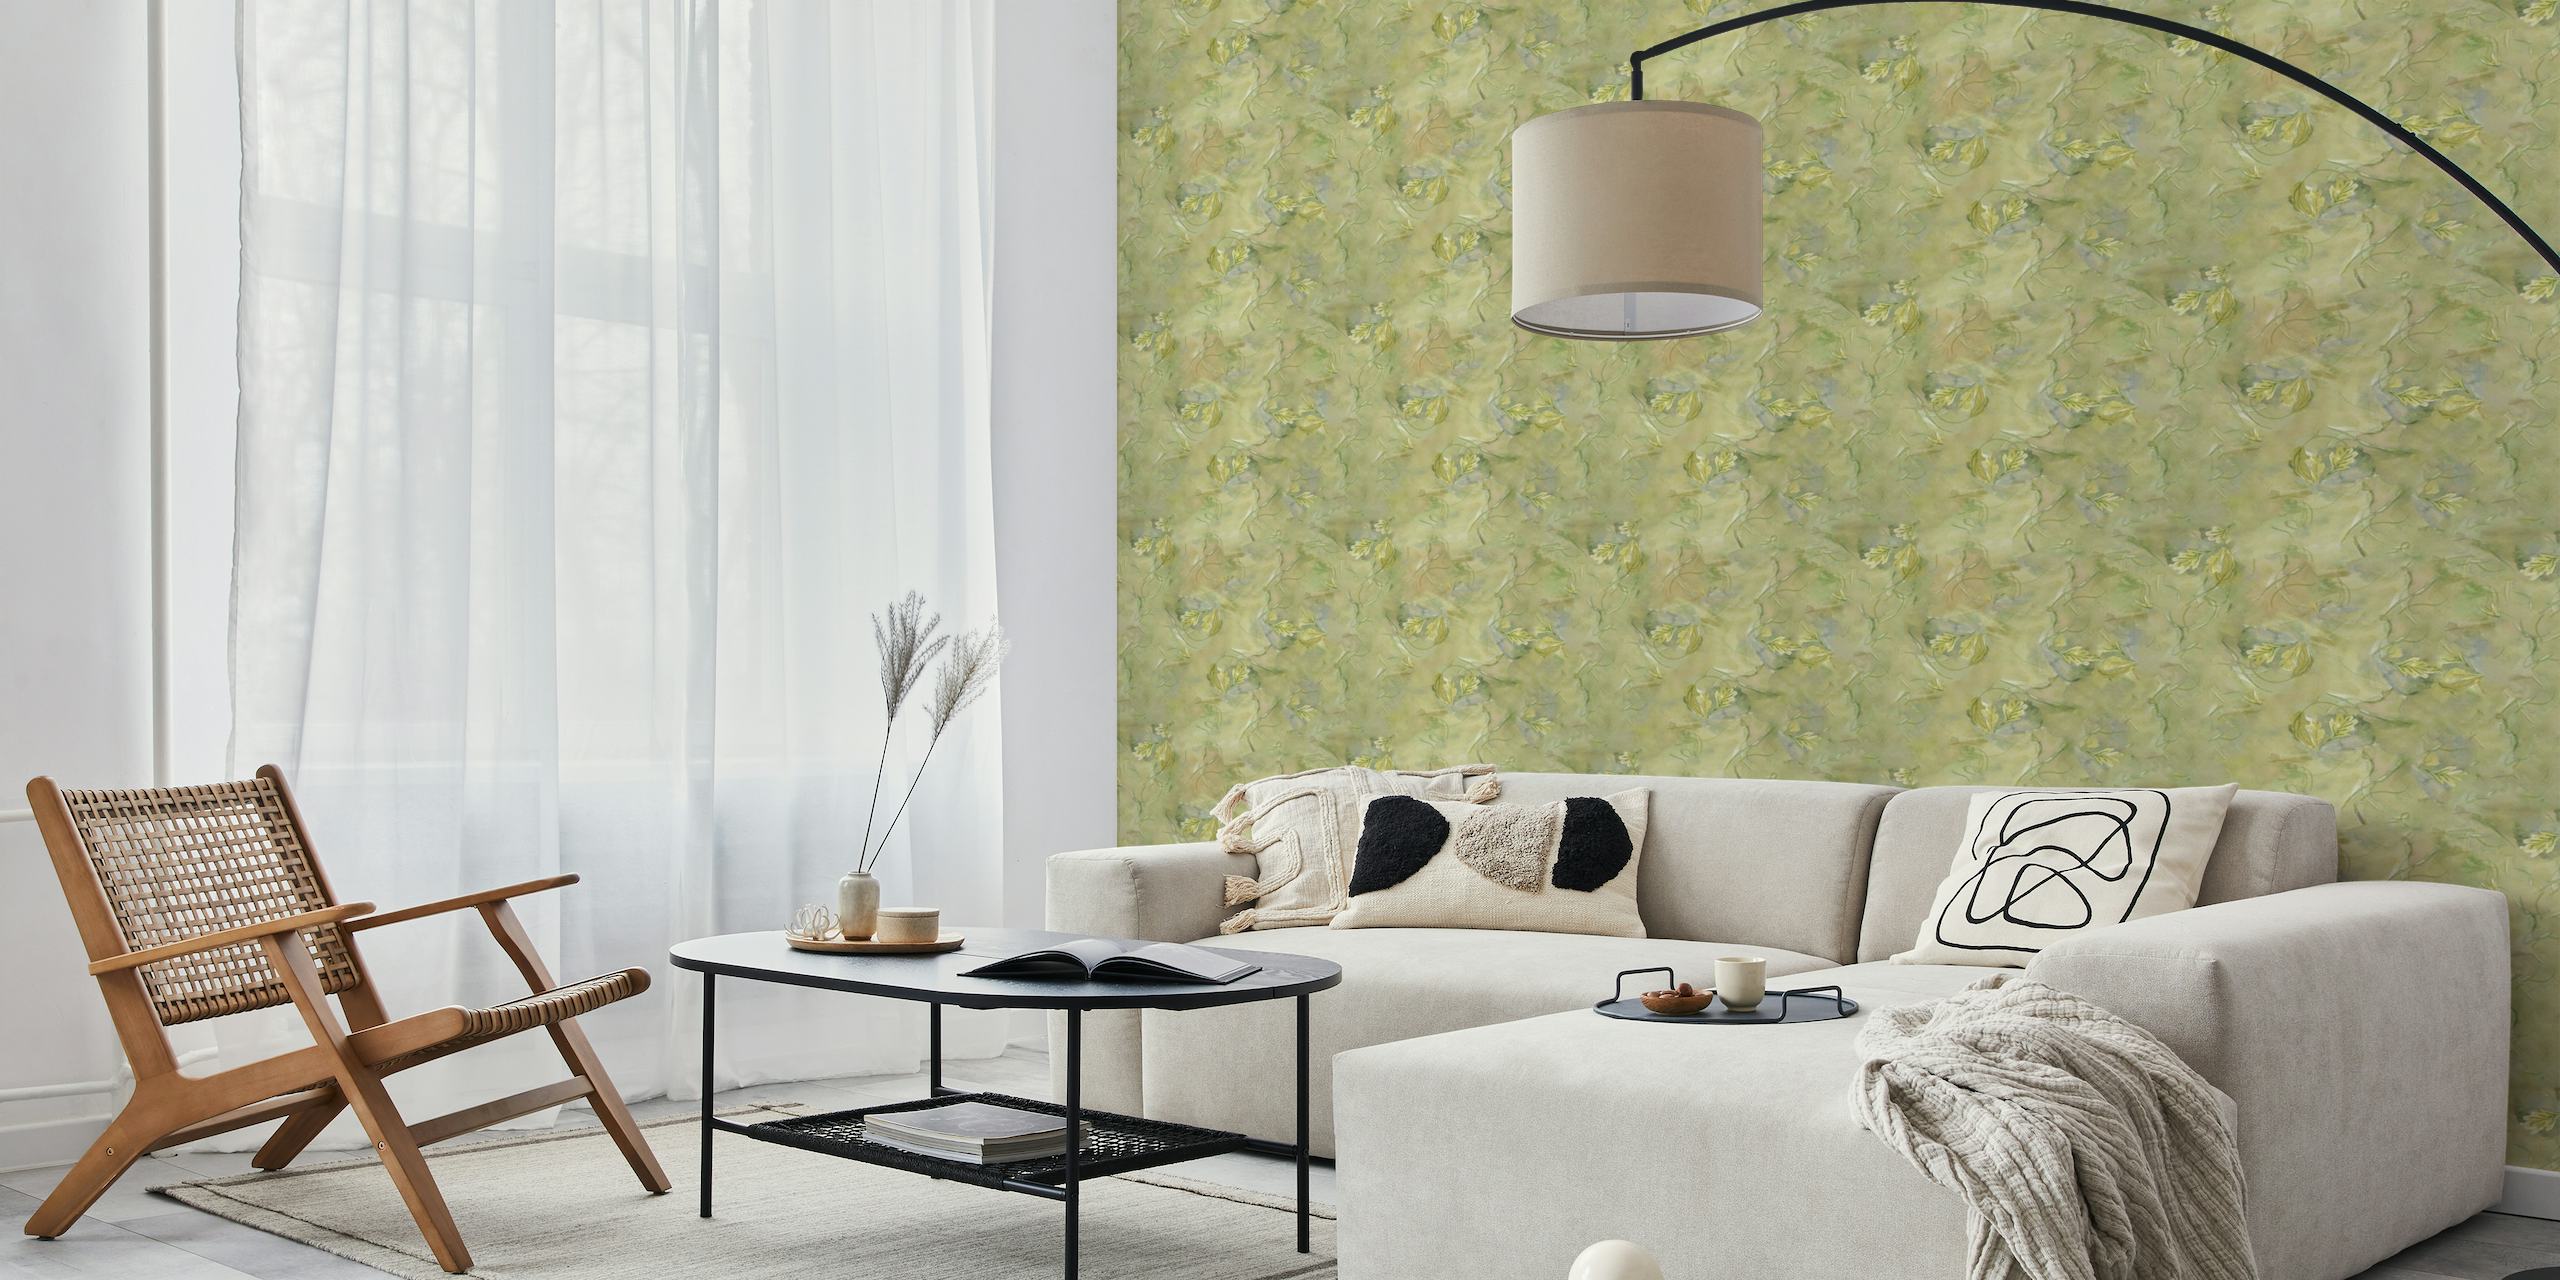 Soft-hued wall mural with delicate floral designs in green and yellow tones